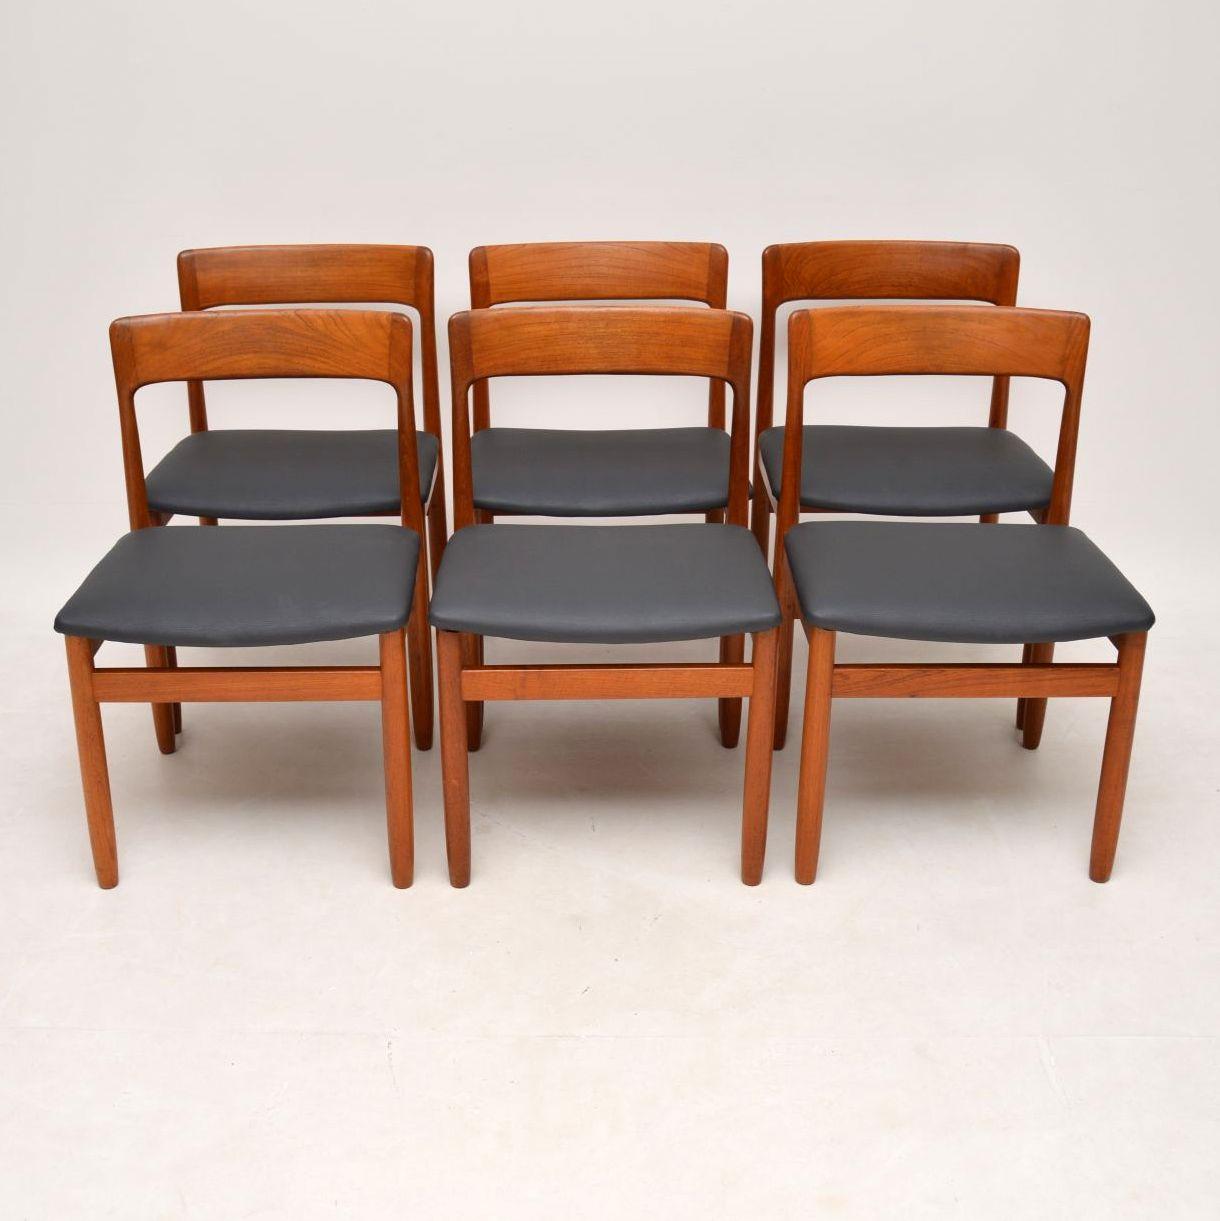 A stylish and extremely well made set of vintage teak dining chairs by Younger, these date from the 1960s; they look very similar to Danish dining chairs by Niels Moller. The condition is excellent for their age, the solid teak frames are all clean,